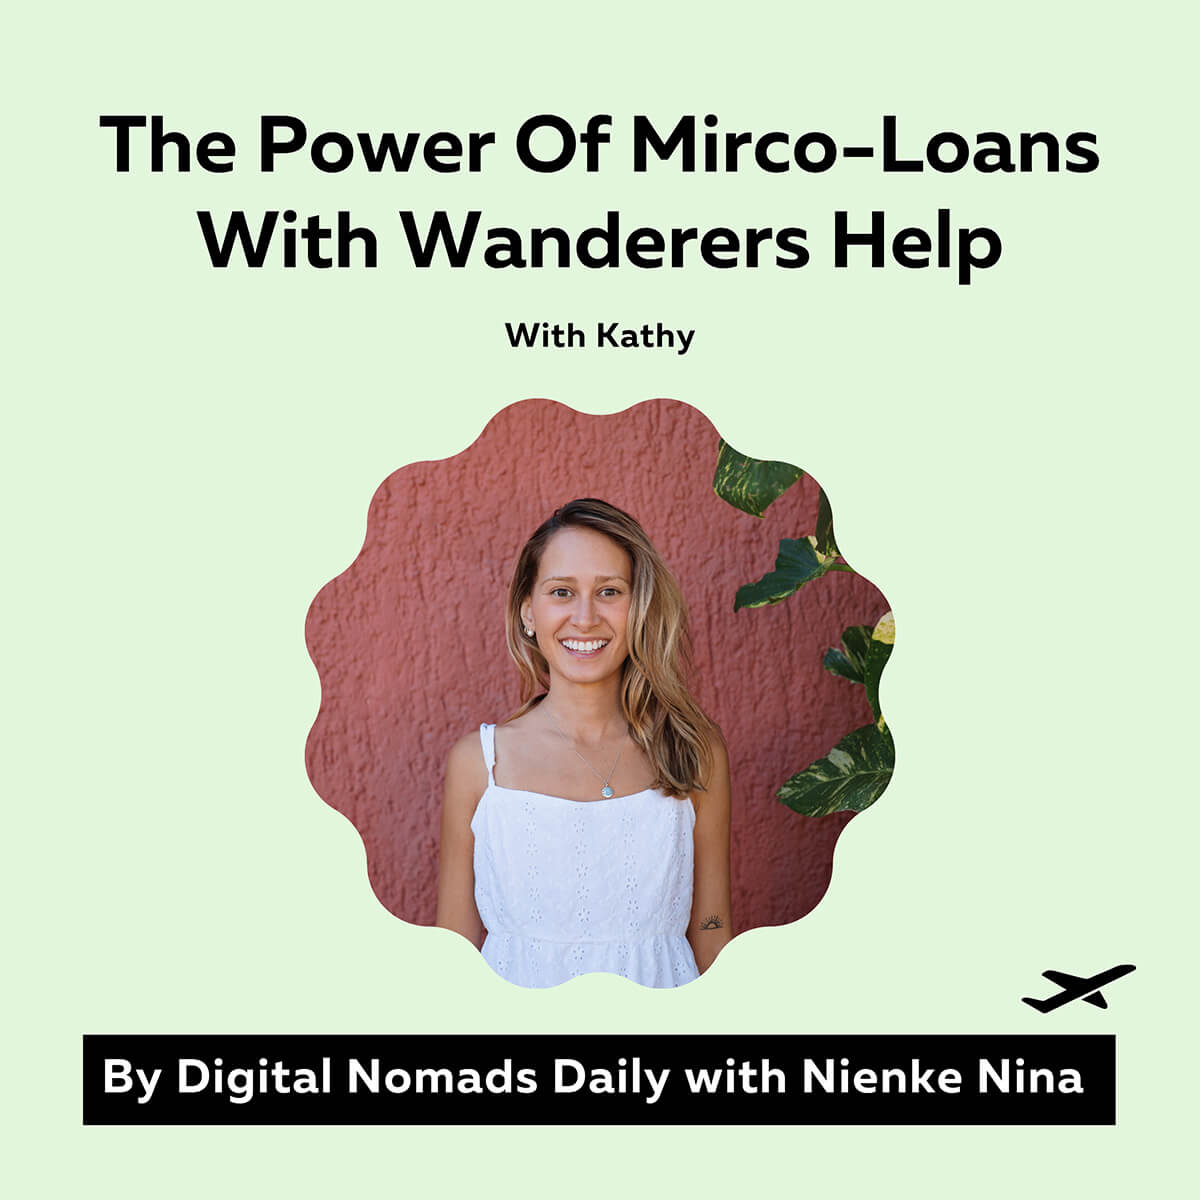 Digital Nomads Daily Podcast Episode 34 The Power of mirco-loans with Wanderers Help (1)